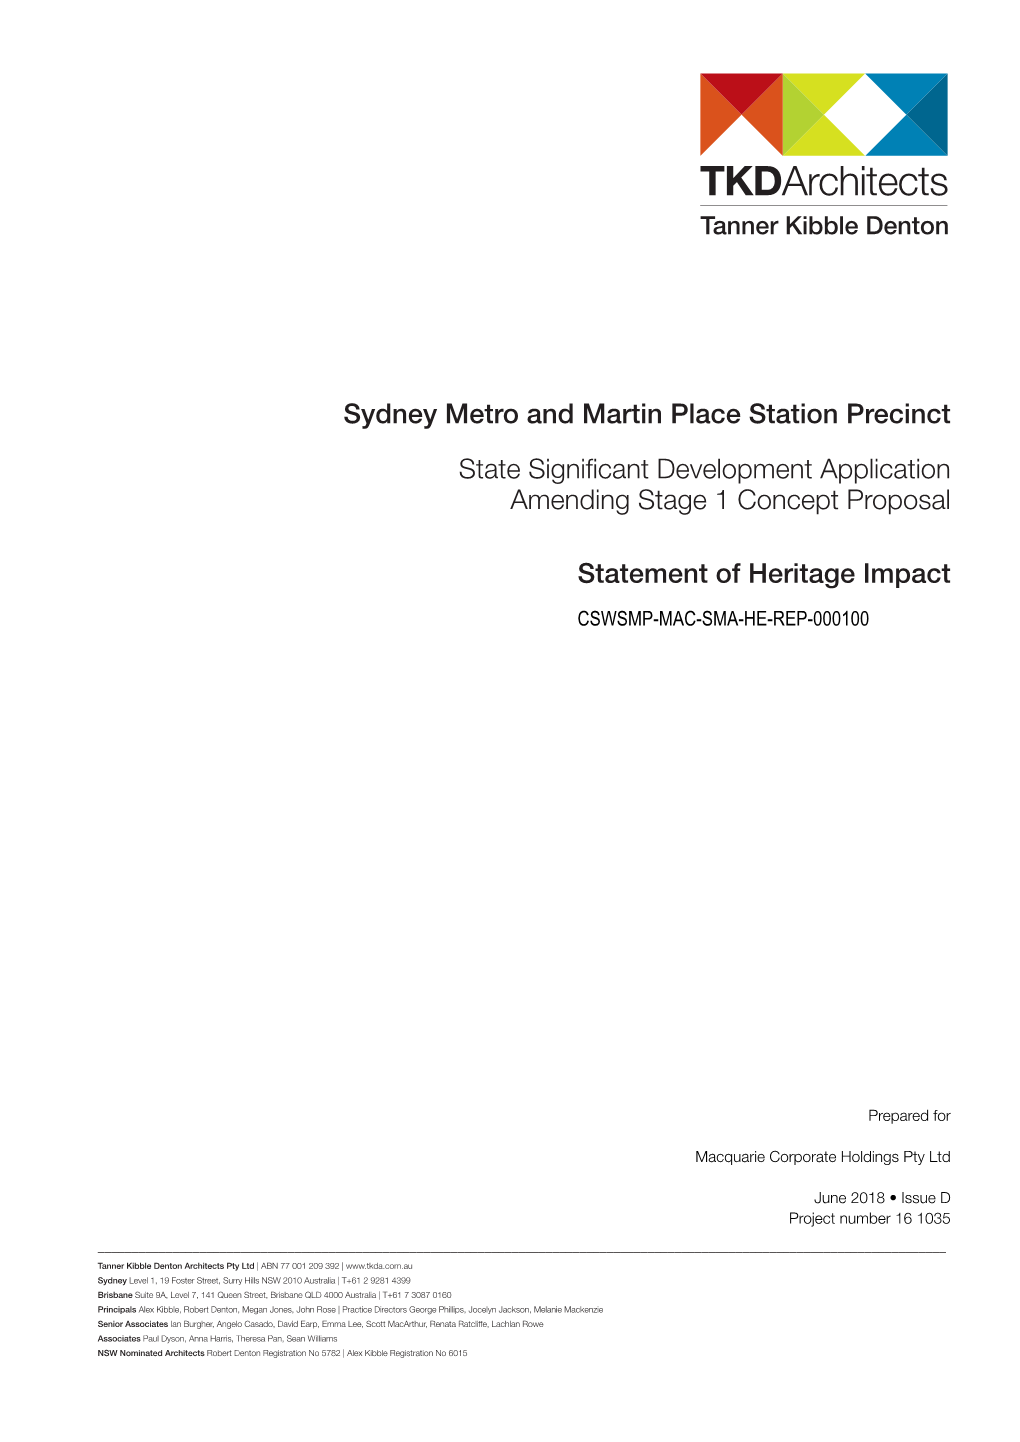 Sydney Metro and Martin Place Station Precinct State Significant Development Application Amending Stage 1 Concept Proposal State